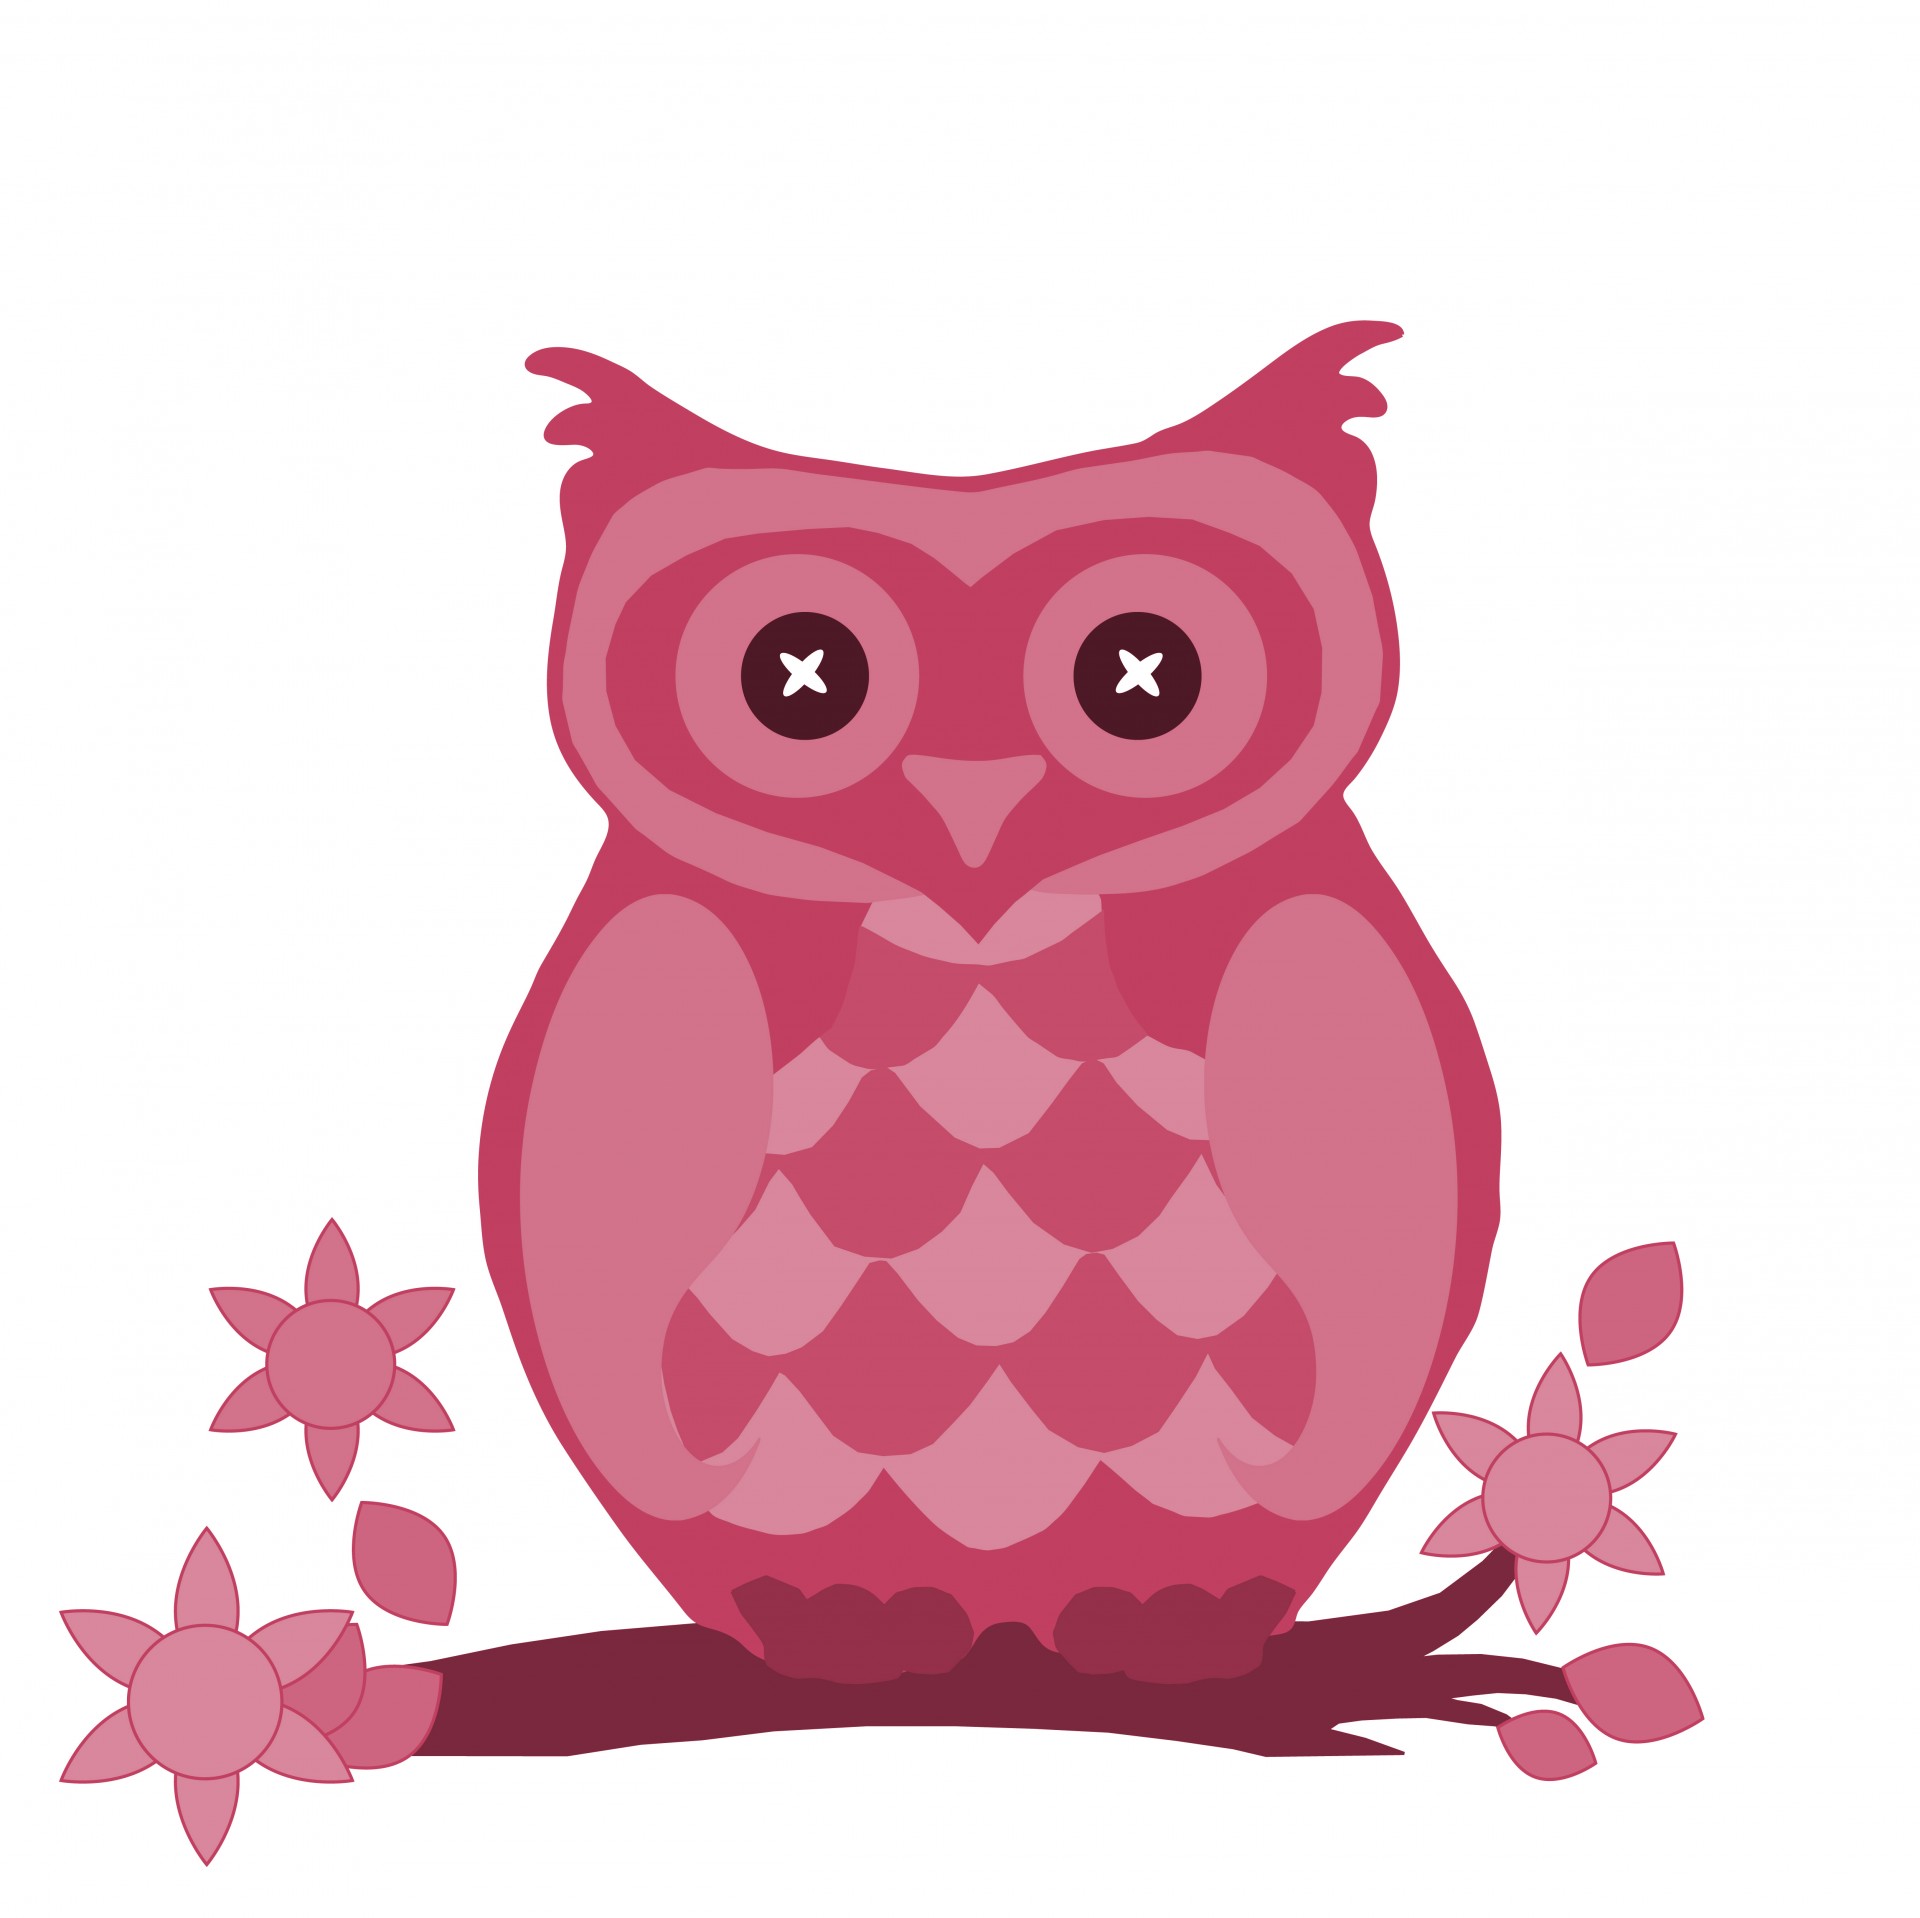 Cute patterned pink owl clipart for scrapbooking